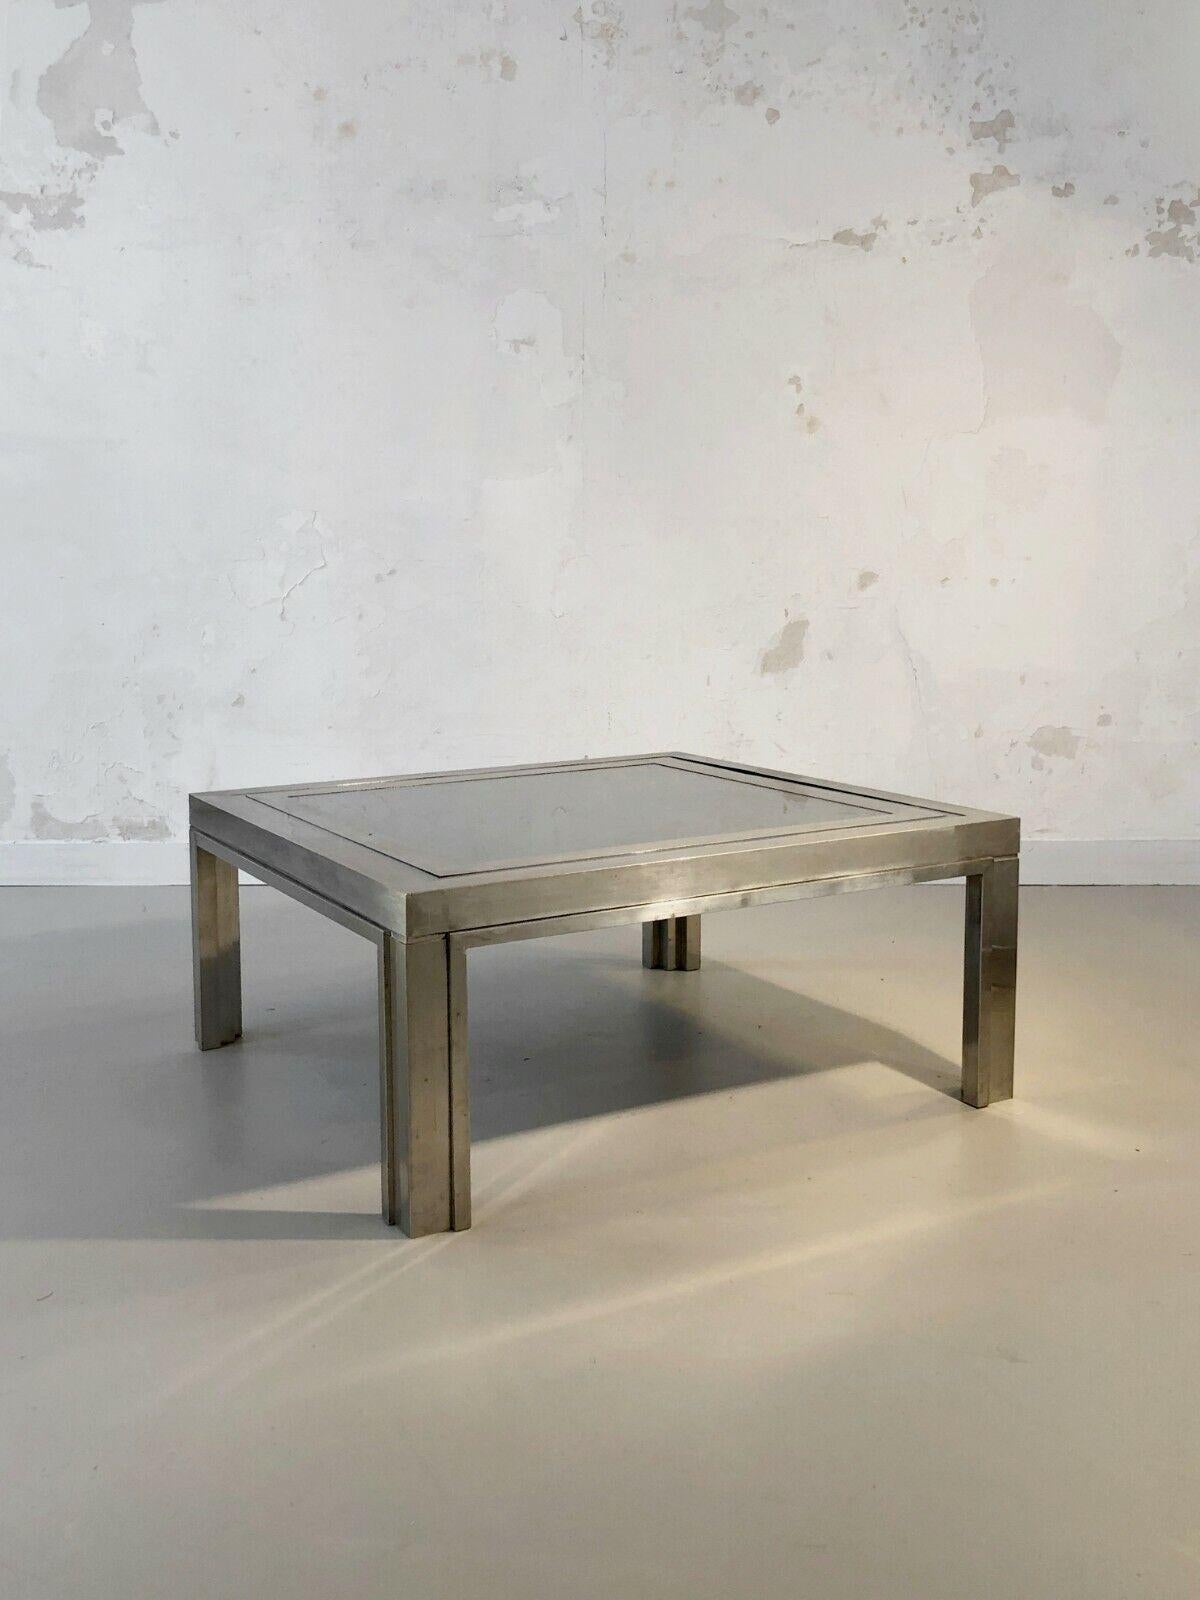 A rigorous and powerful square coffee table, Post-Modernist, Kinetic, Constructivist, Shabby-Chic, complex constructivist structure with geometric reliefs in wood veneered with bronze or nickel-plated brass, double-frame top, nickel-plated frame on